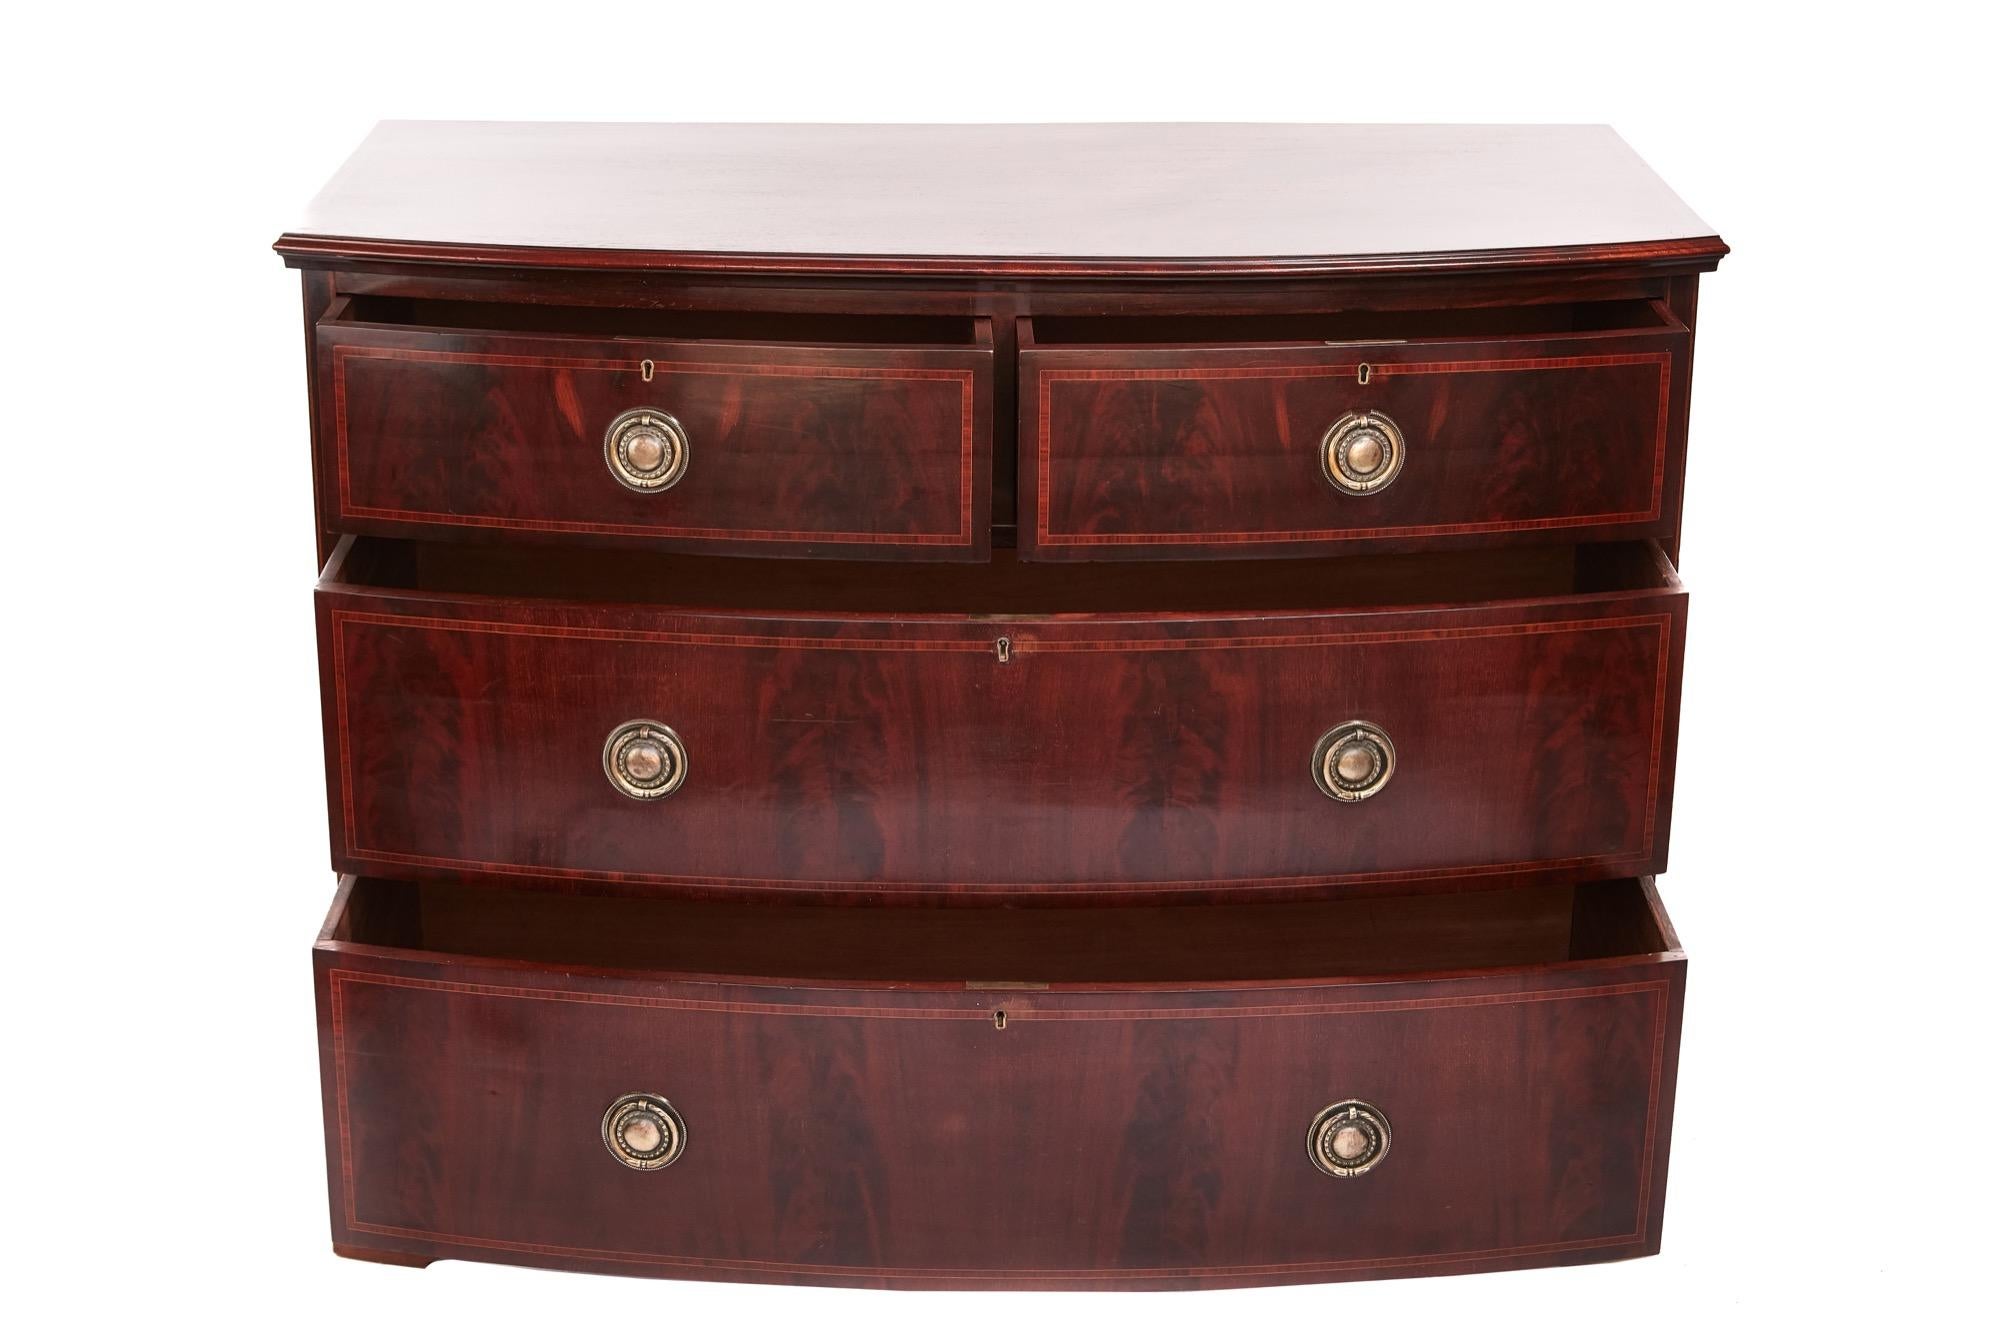 Antique mahogany bow front chest of drawers, having a lovely cross banded mahogany top, 2 short and 2 long drawers cross banded in satinwood with original brass handles standing on original bracket feet. Lovely colour quality and condition.